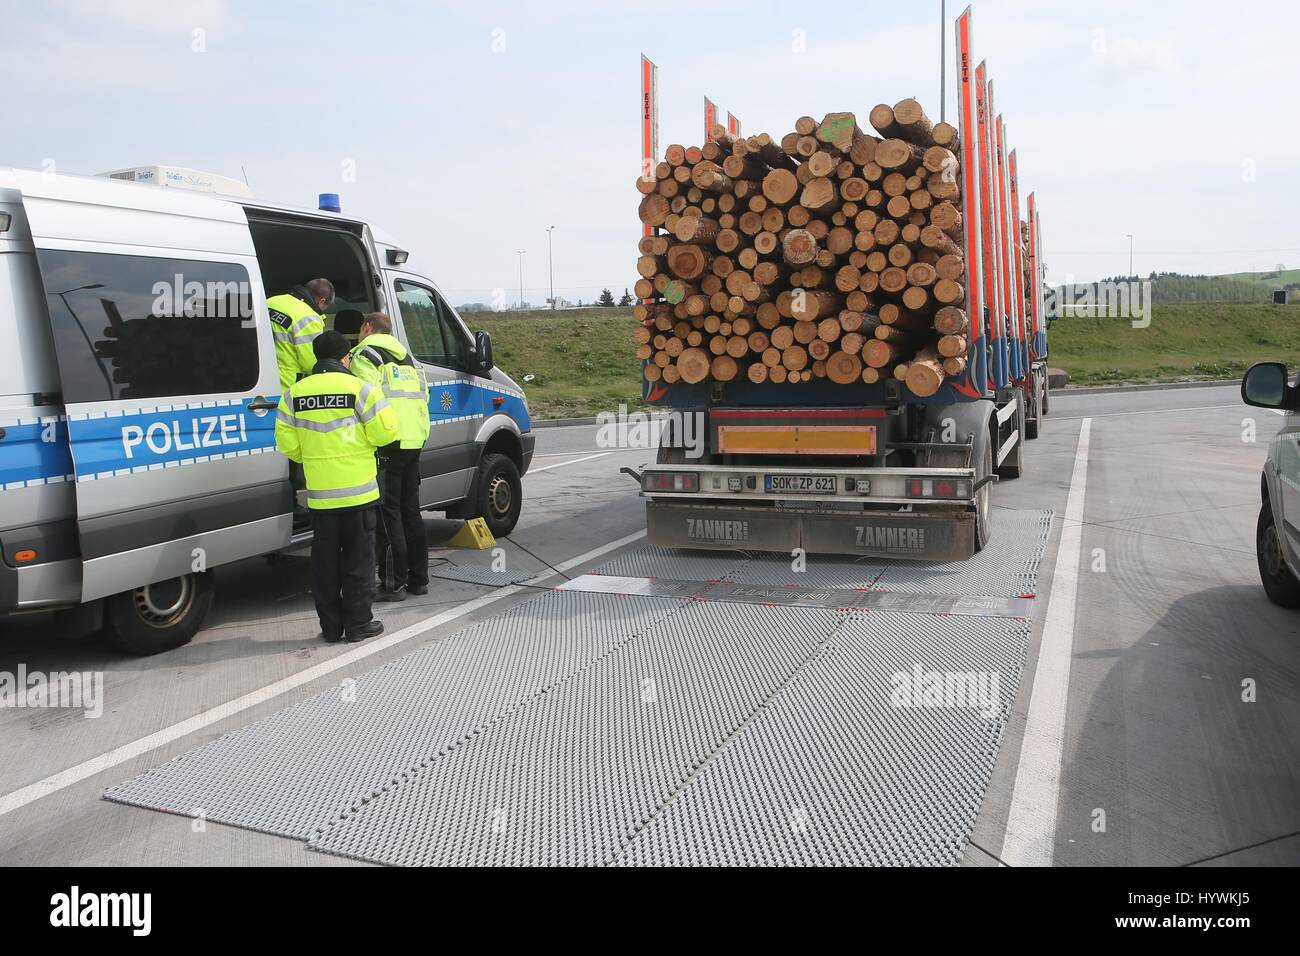 Schleiz, Germany. 26th Apr, 2017. A wood transporter being weighed on Police mobile scales at a rest area of the Autobahn 9 near Schleiz, Germany, 26 April 2017. Passenger cars and trailer trucks were checked as part of a large control operation conducted by the Police, Customs, the Office for Occupational Safety and the Environmental Office. Photo: Bodo Schackow/dpa-Zentralbild/dpa/Alamy Live News Stock Photo